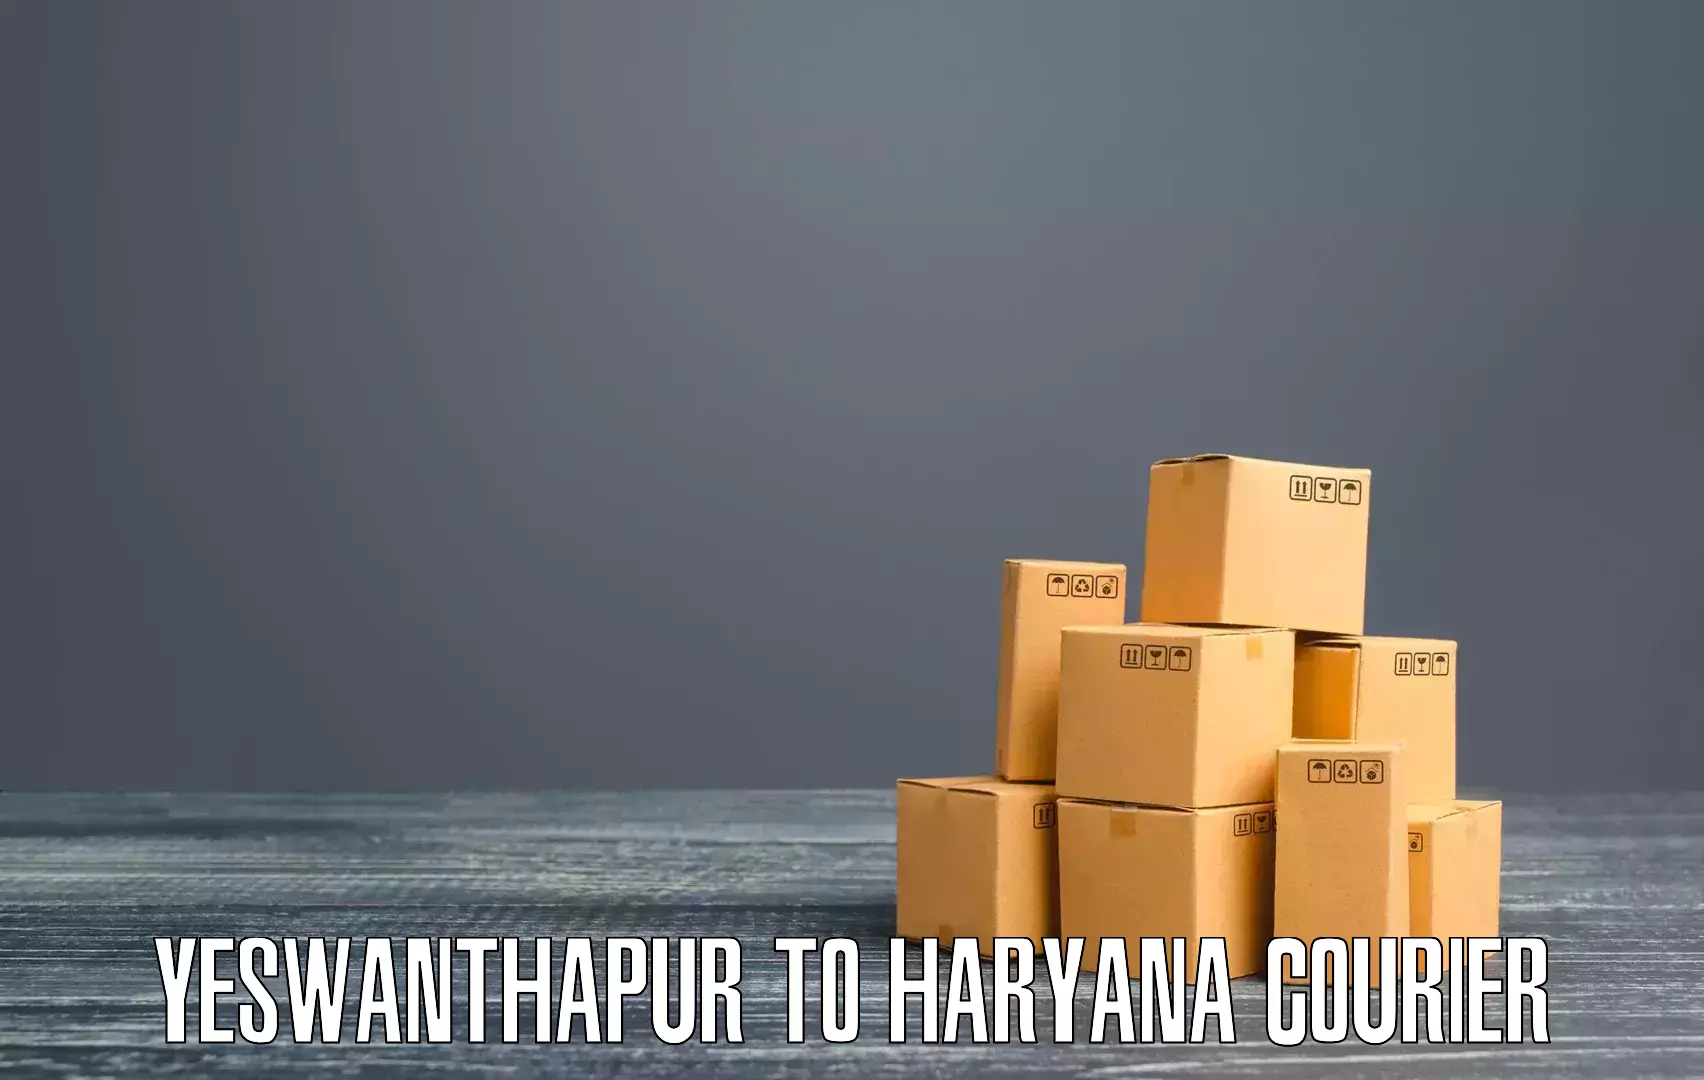 Next-day delivery options Yeswanthapur to Bhiwani